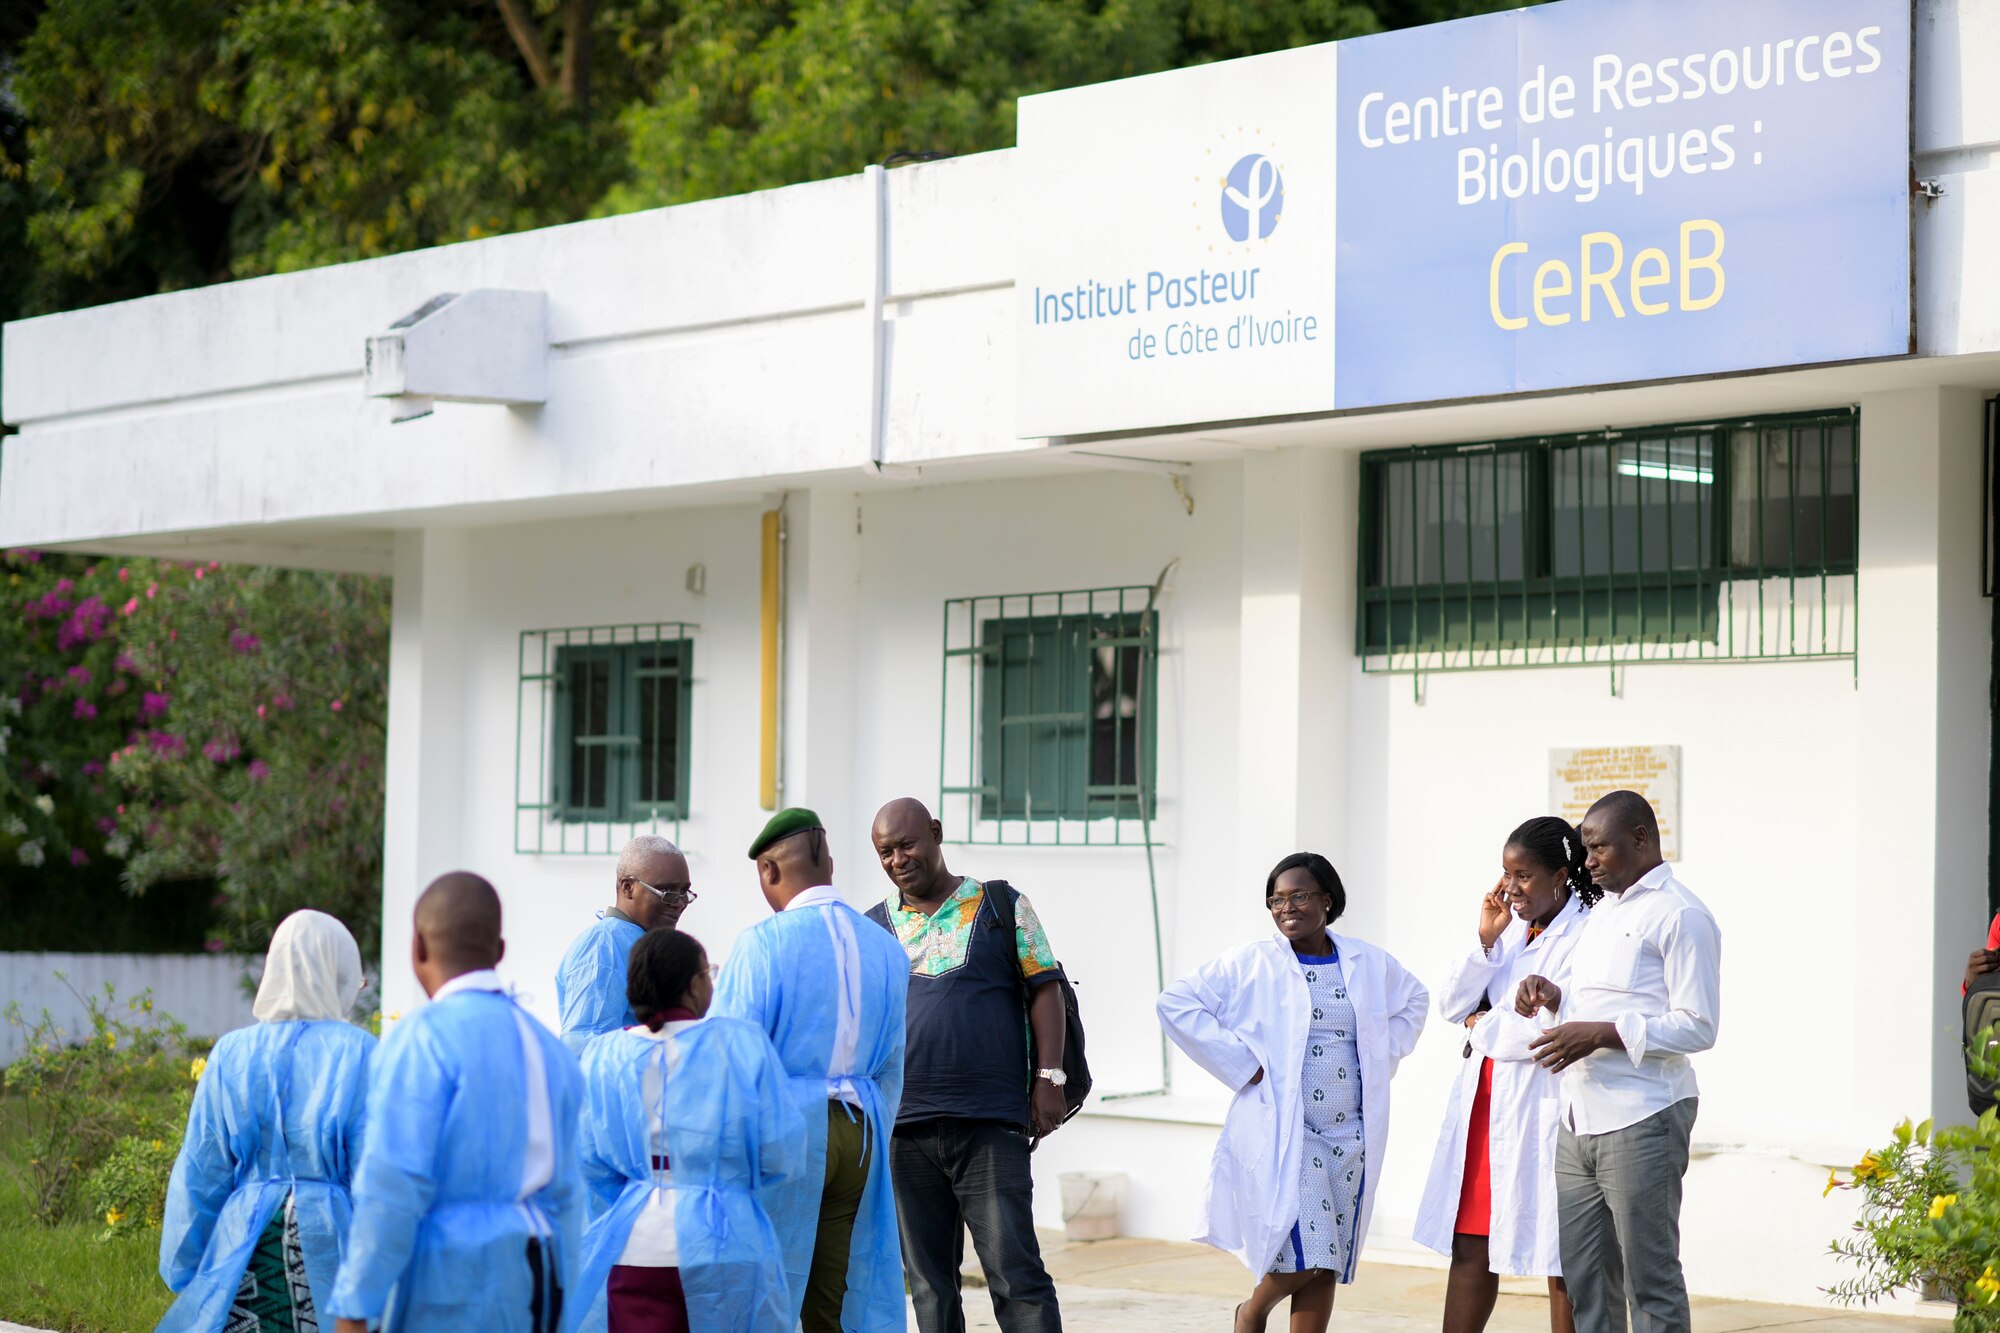 Participants from the African Partner Outbreak Response Alliance engagement gather outside the Pasteur Institute Lab following a tour of the facility in Abidjan, Côte d'Ivoire, Nov. 18, 2019.